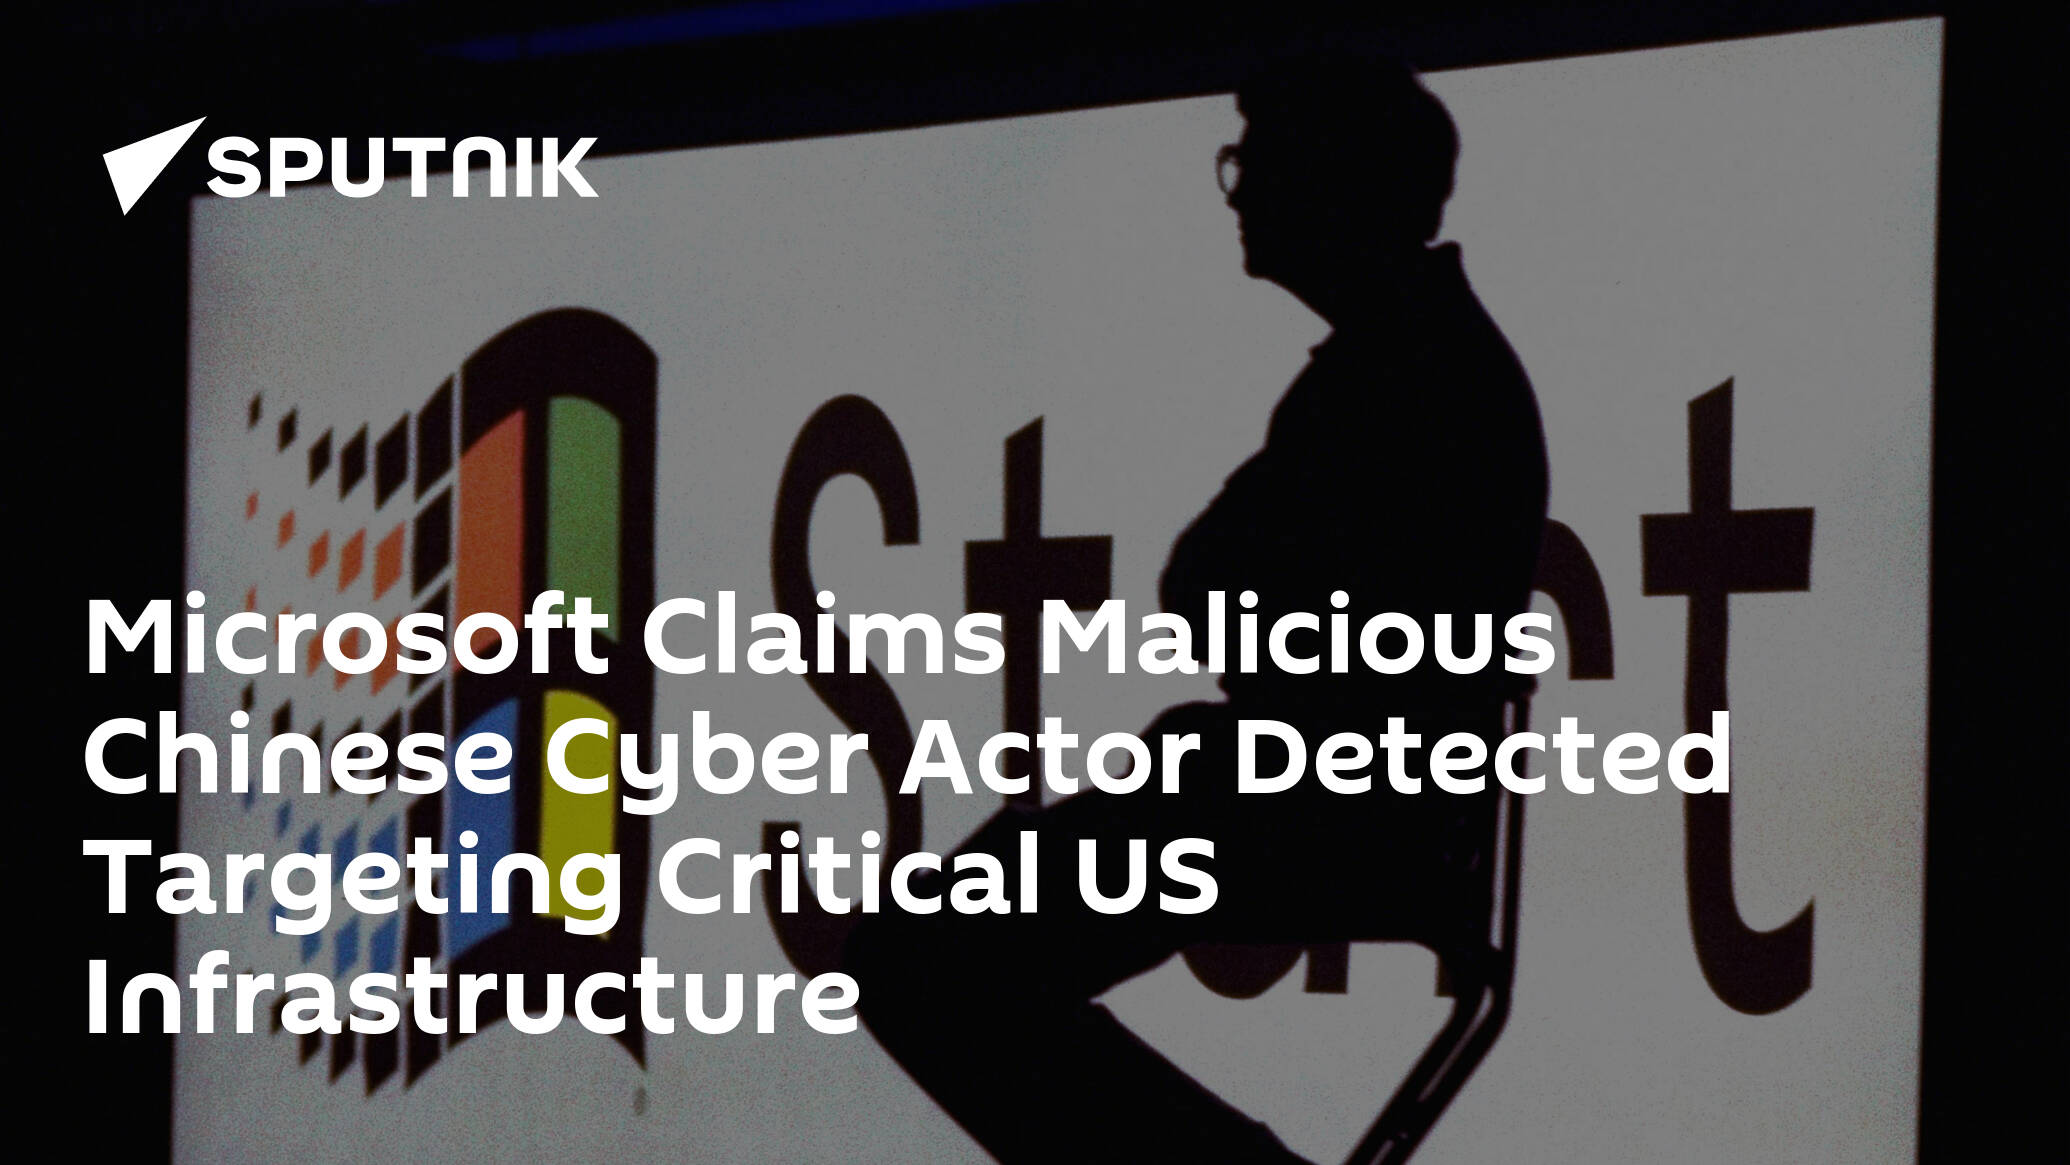 Microsoft Claims Malicious Chinese Cyber Actor Detected Targeting Critical US Infrastructure